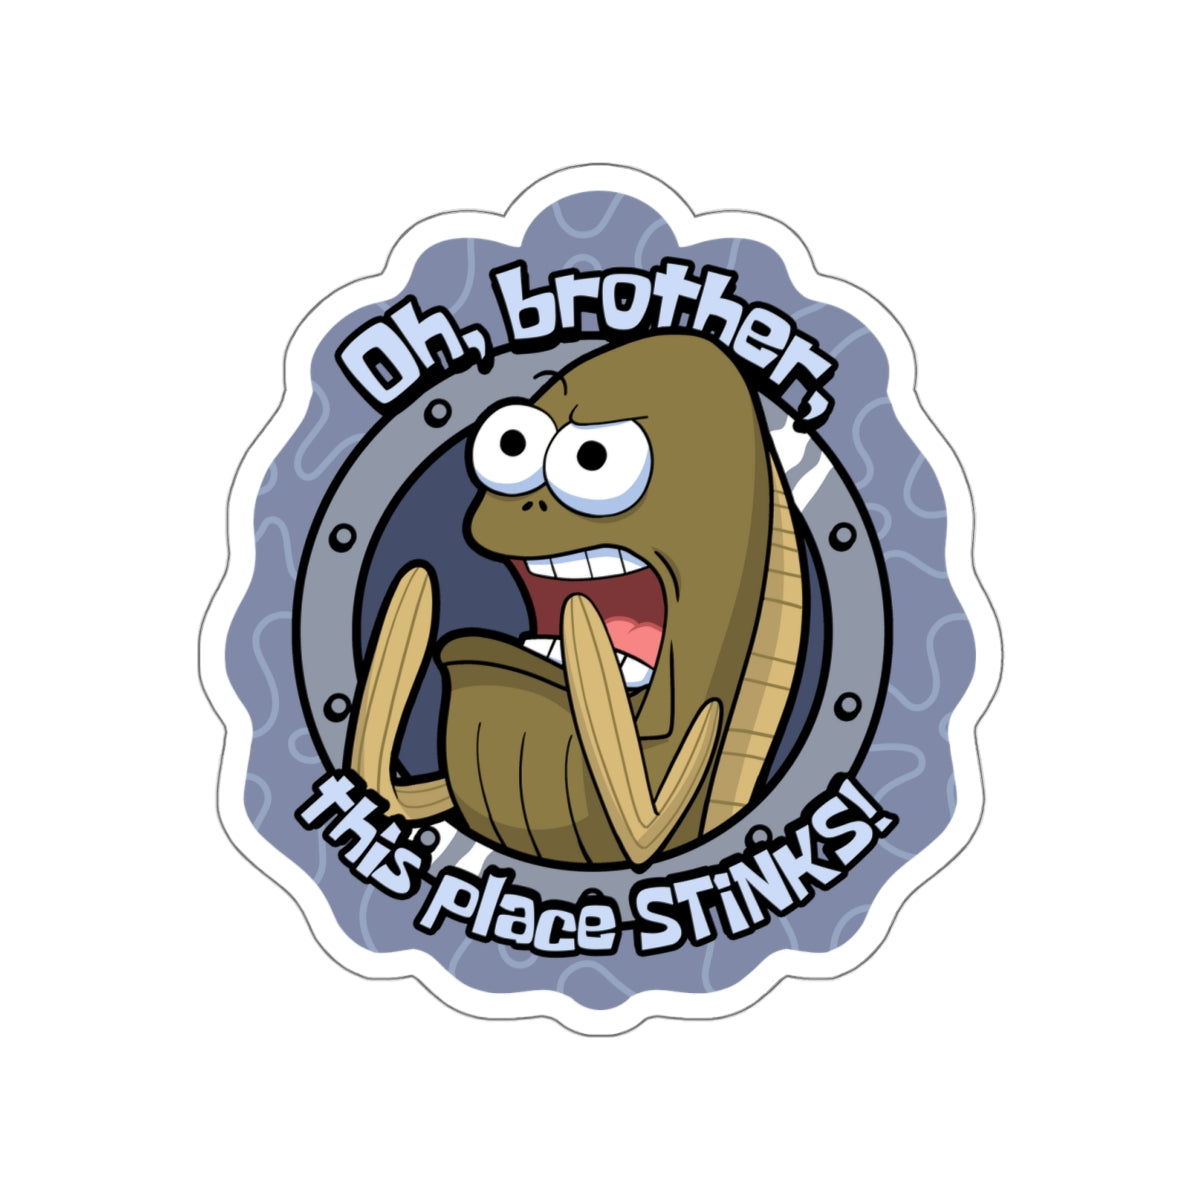 Oh Brother, This Place Stinks! vinyl sticker